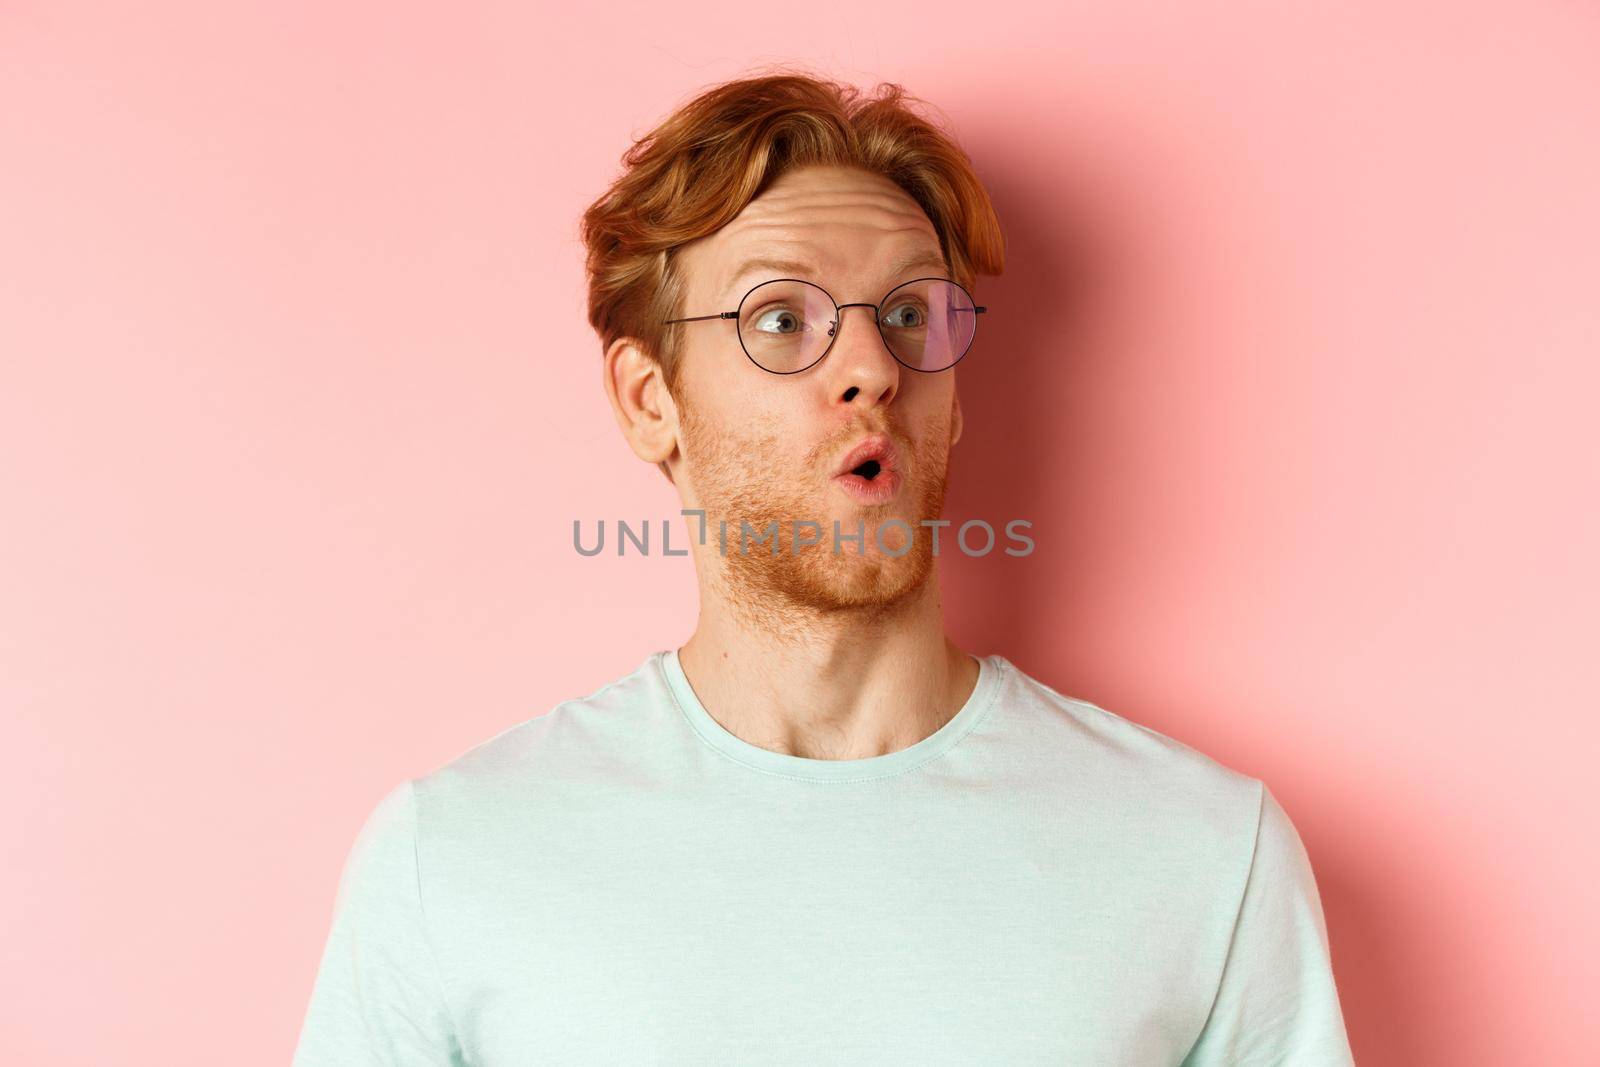 Face of intrigued young man with ginger hair and beard, raising eyebrows surpirsed and looking at upper right corner logo, standing over pink background.